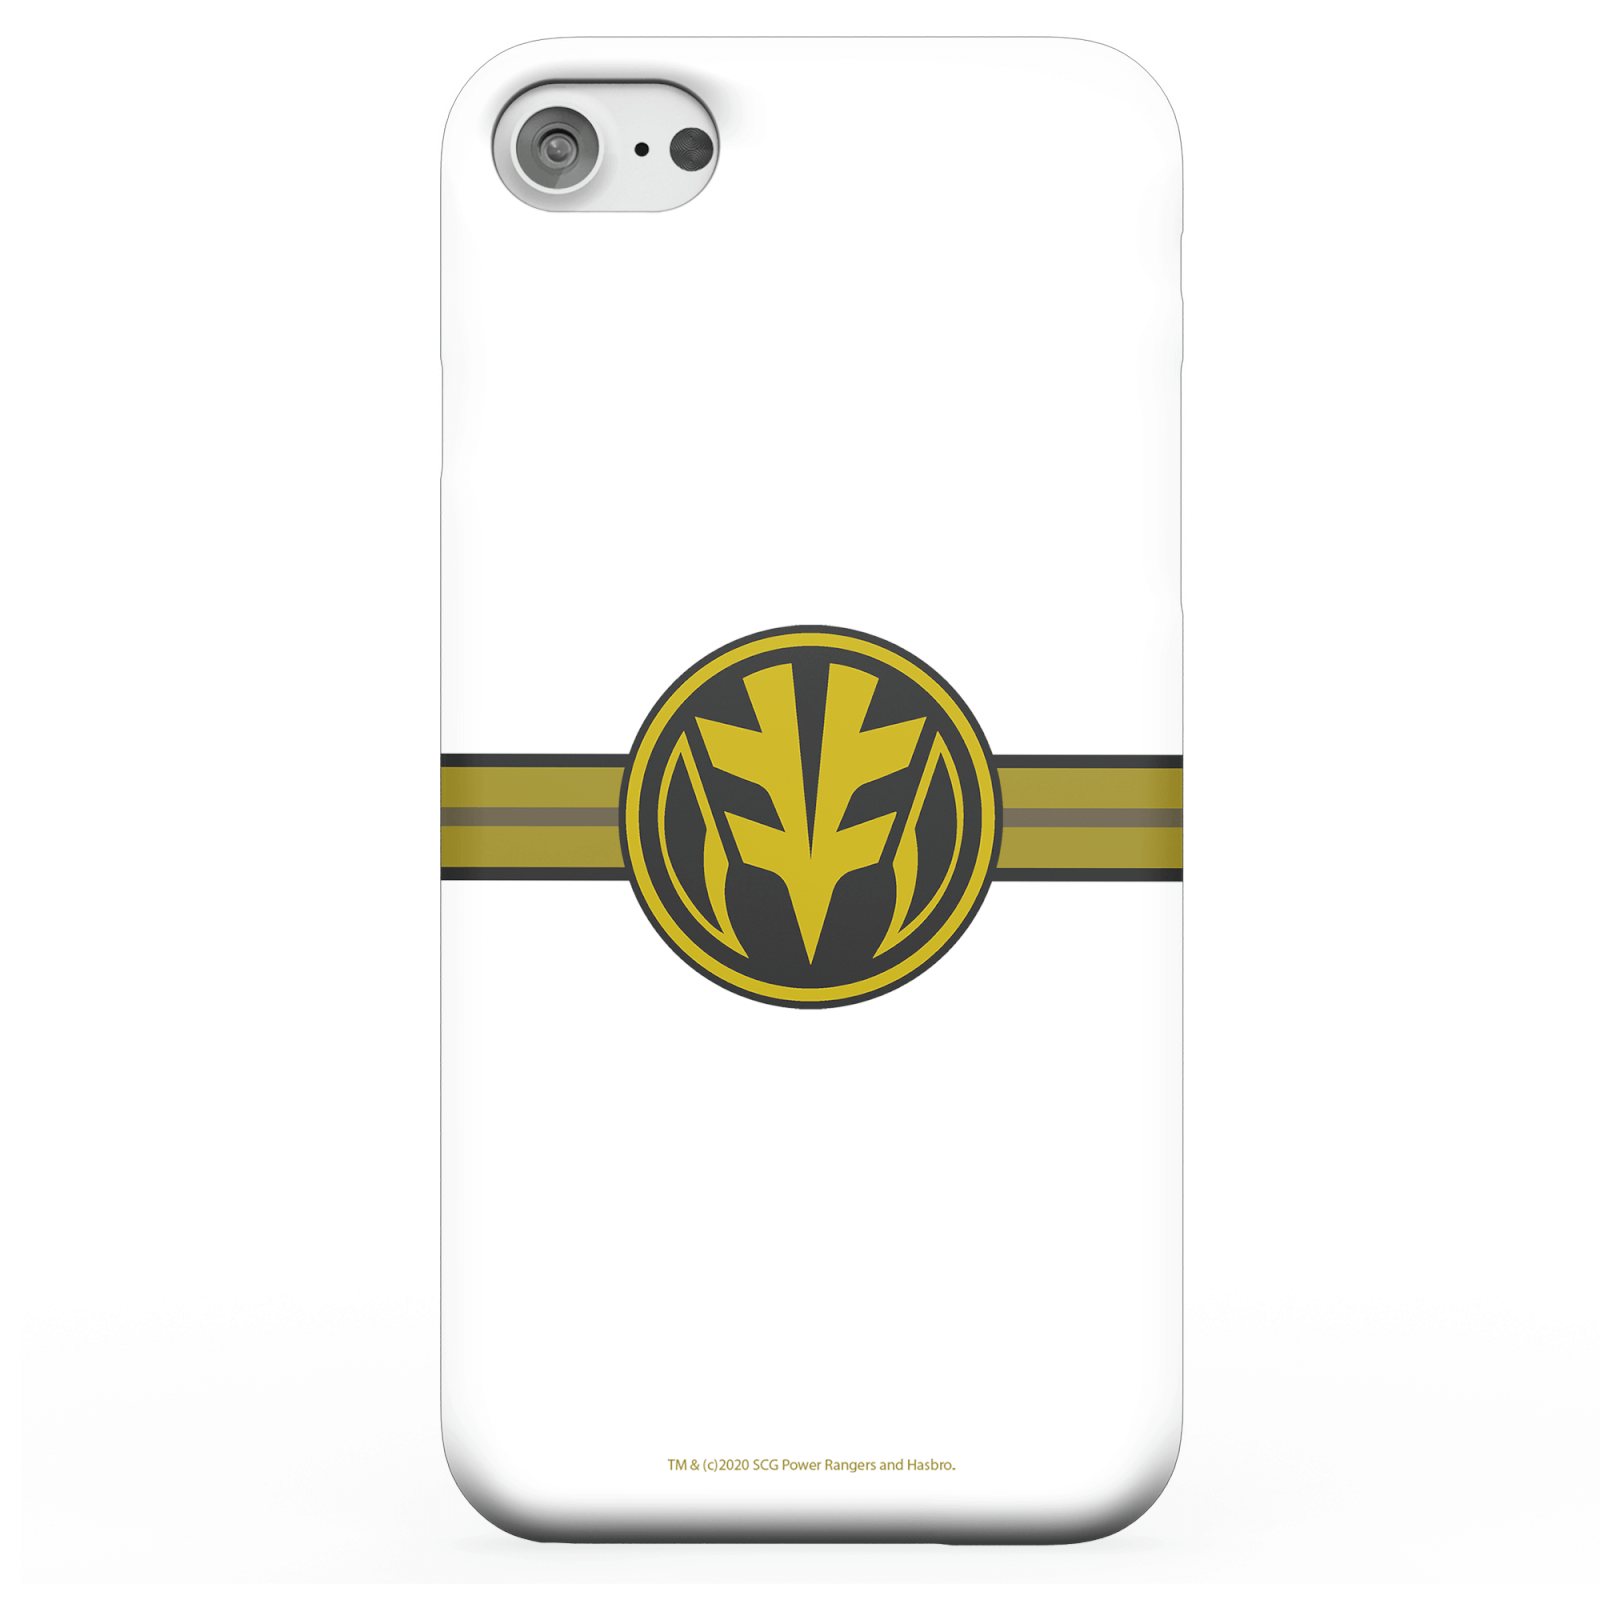 Power Rangers White Tigerzord Phone Case for iPhone and Android - iPhone 5C - Snap Case - Matte